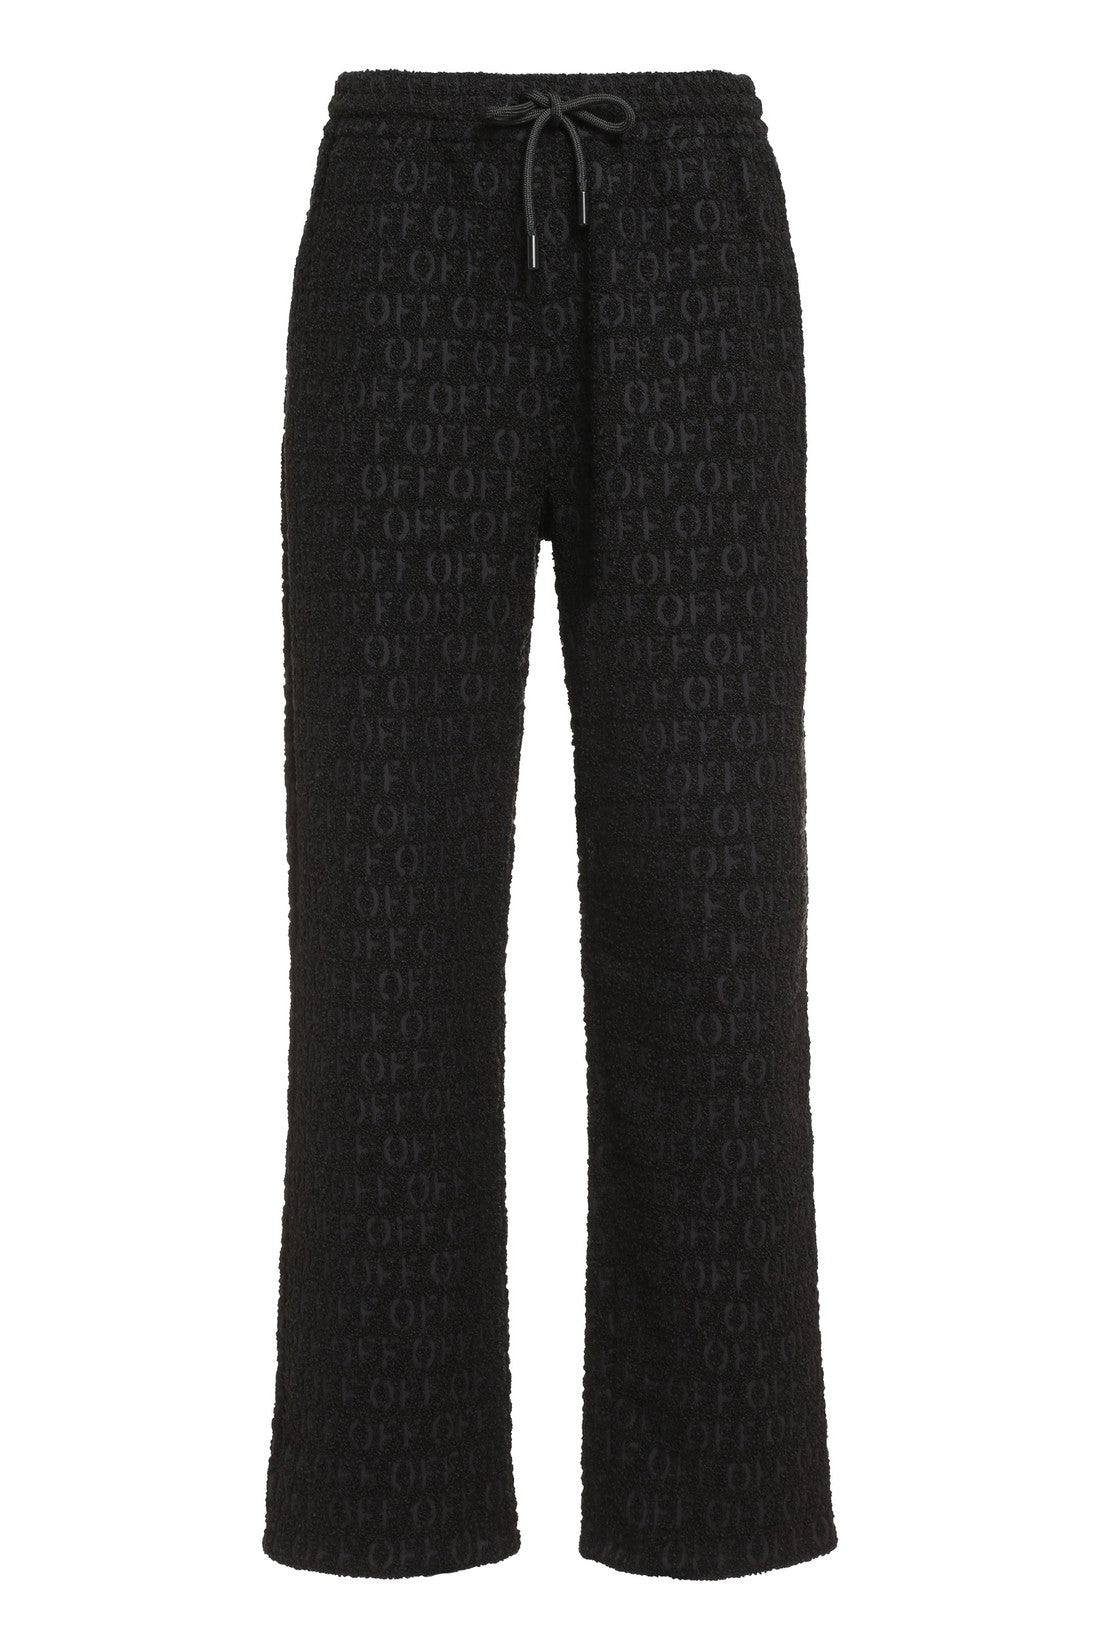 Off-White-OUTLET-SALE-Knitted trousers-ARCHIVIST